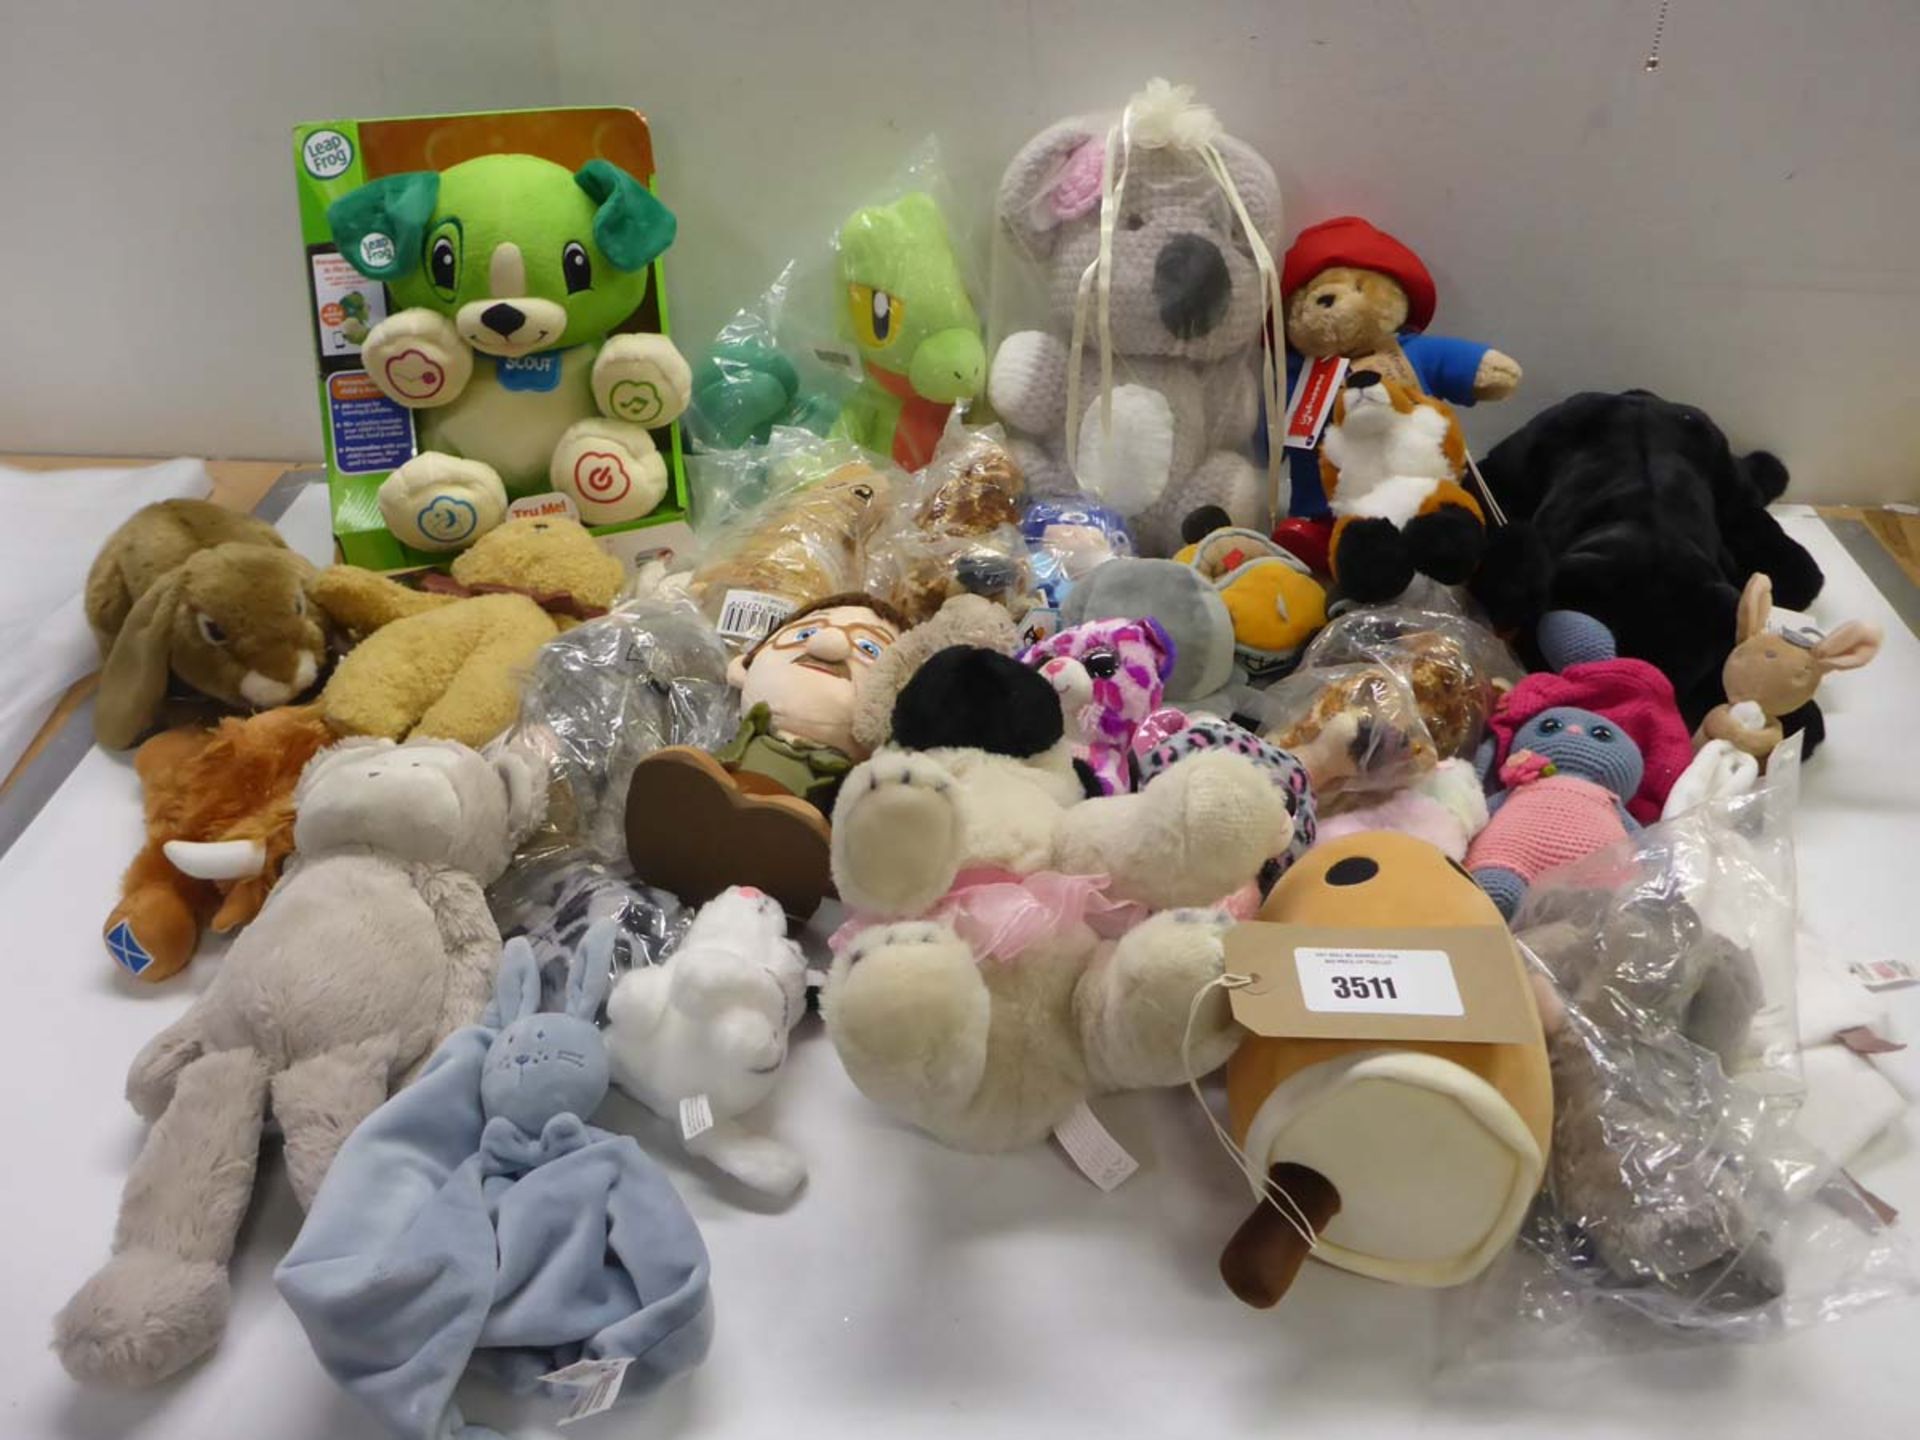 Leap Frog puppy, Paddington Bear and other soft cuddly toys